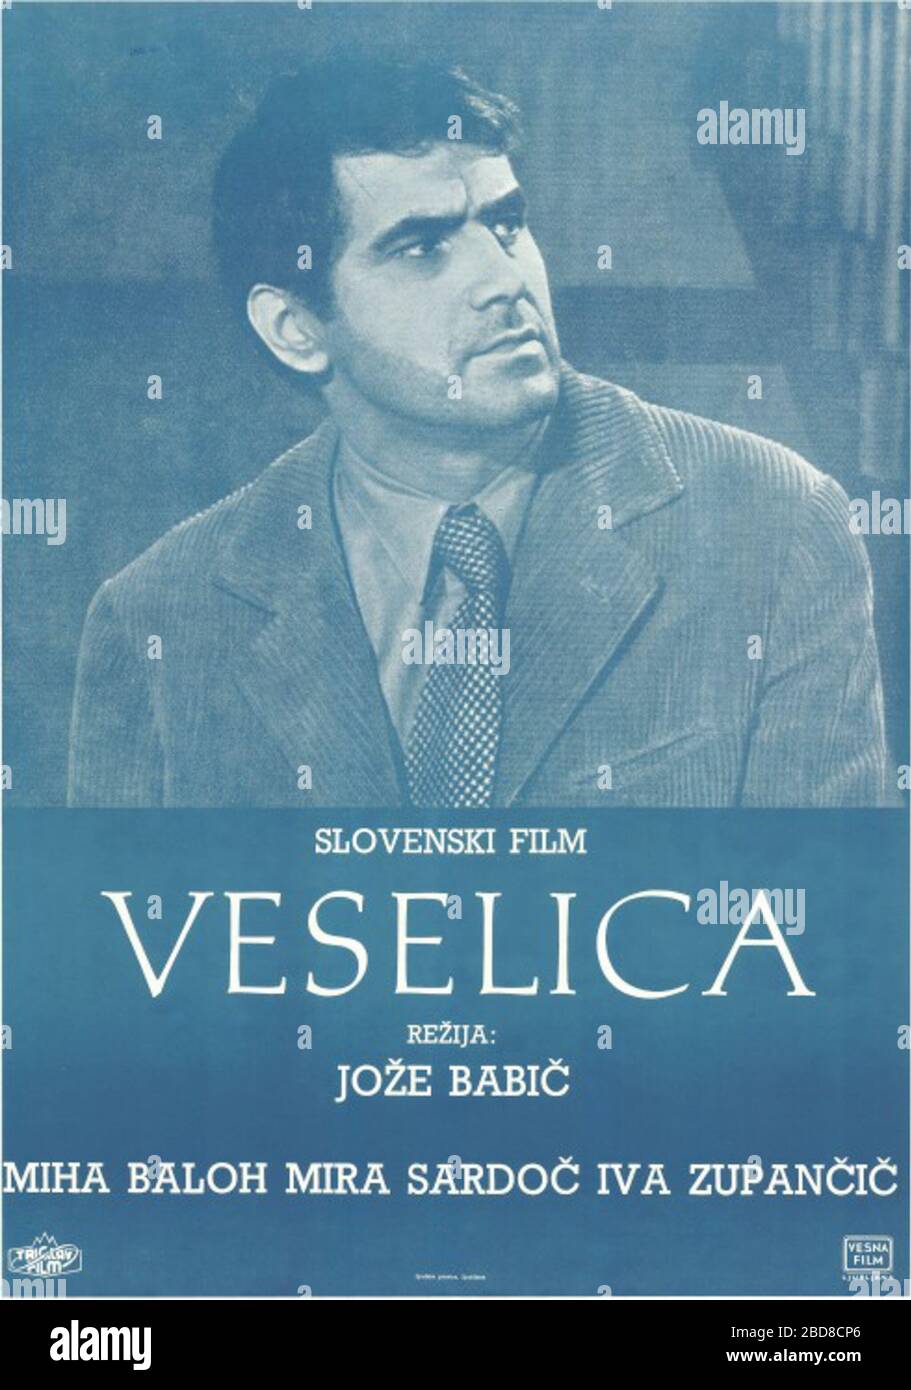 'Slovenščina: Plakat za film Veselica.; 1959; This image is available from the Digital Library of Slovenia under the reference number 6ECZ02I4  This tag does not indicate the copyright status of the attached work. A normal copyright tag is still required. See Commons:Licensing for more information. Deutsch | English | español | italiano | македонски | polski | português | slovenščina | +/−; Unknown author; ' Stock Photo